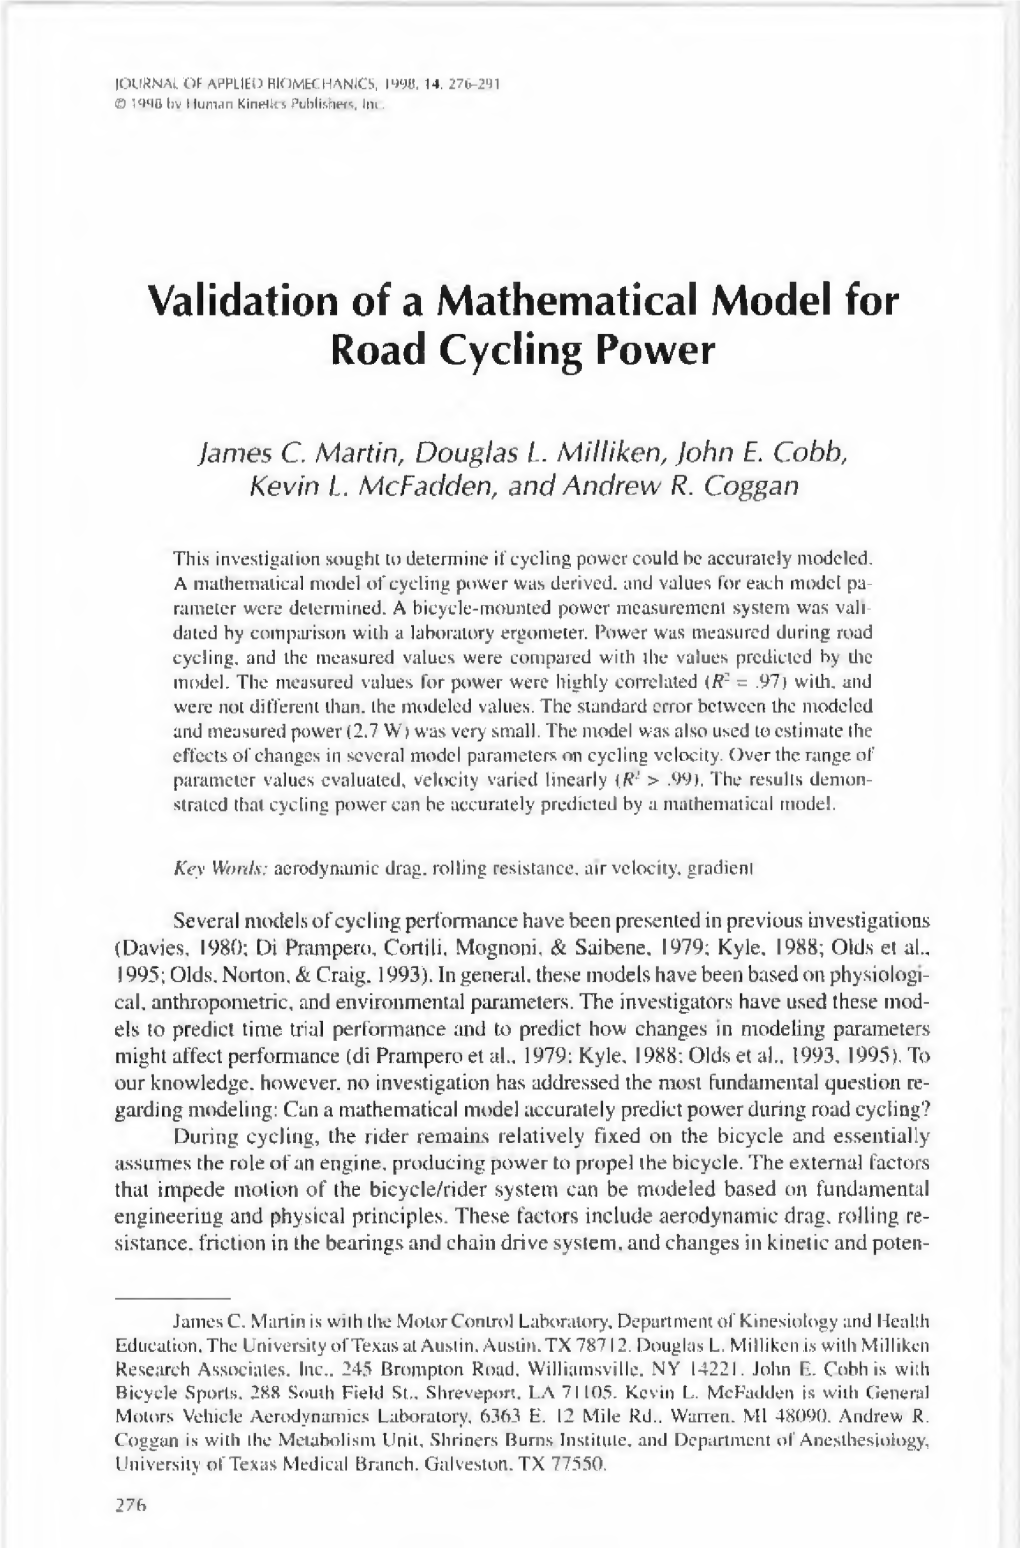 Validation of a Mathematical Model for Road Cycling Power